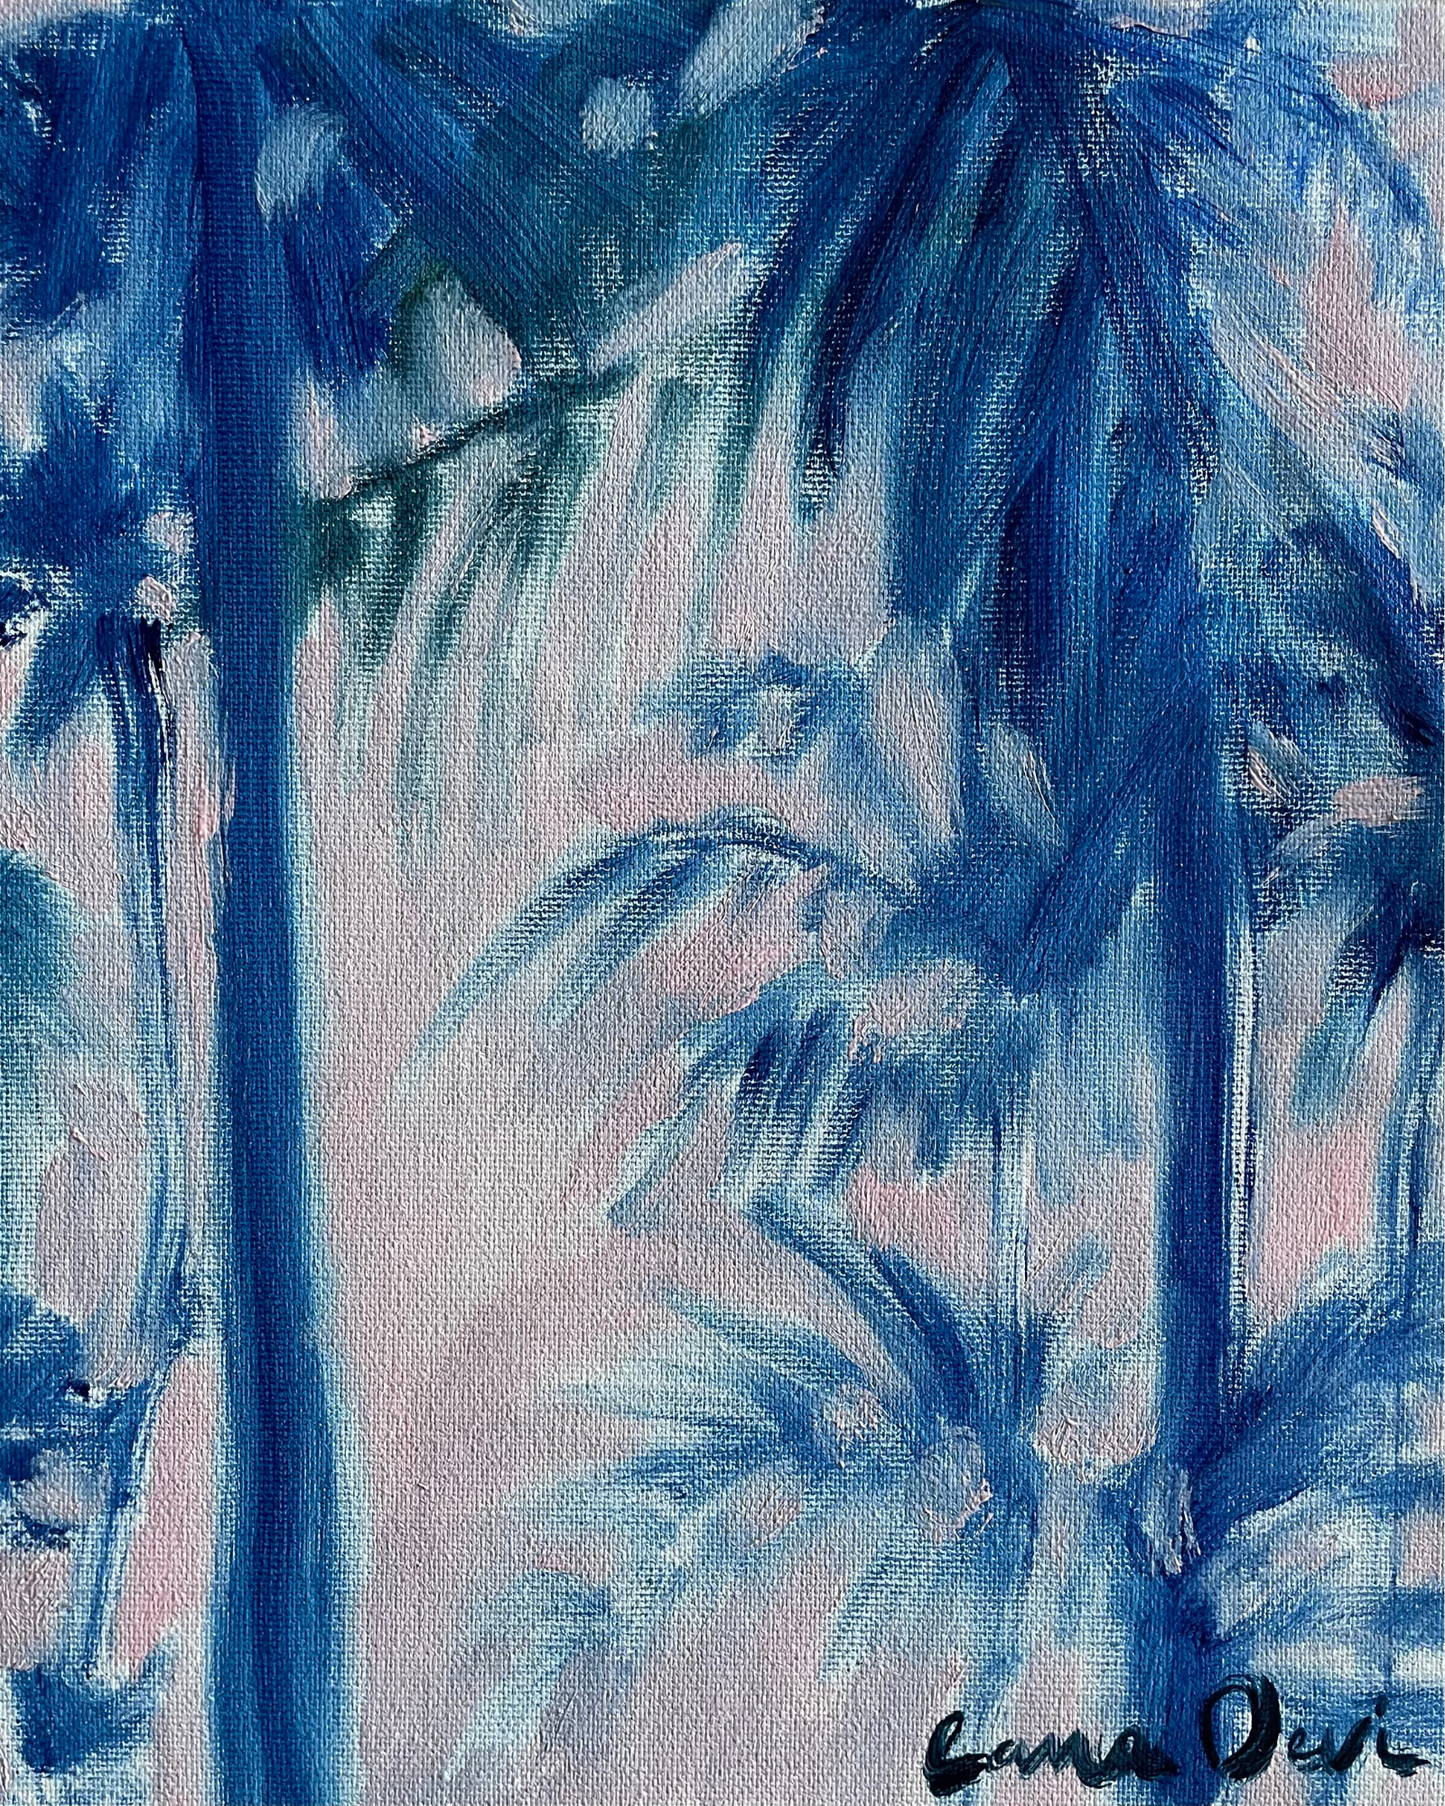 Whispering Palms Collection of paintings in oil by Lana Devi